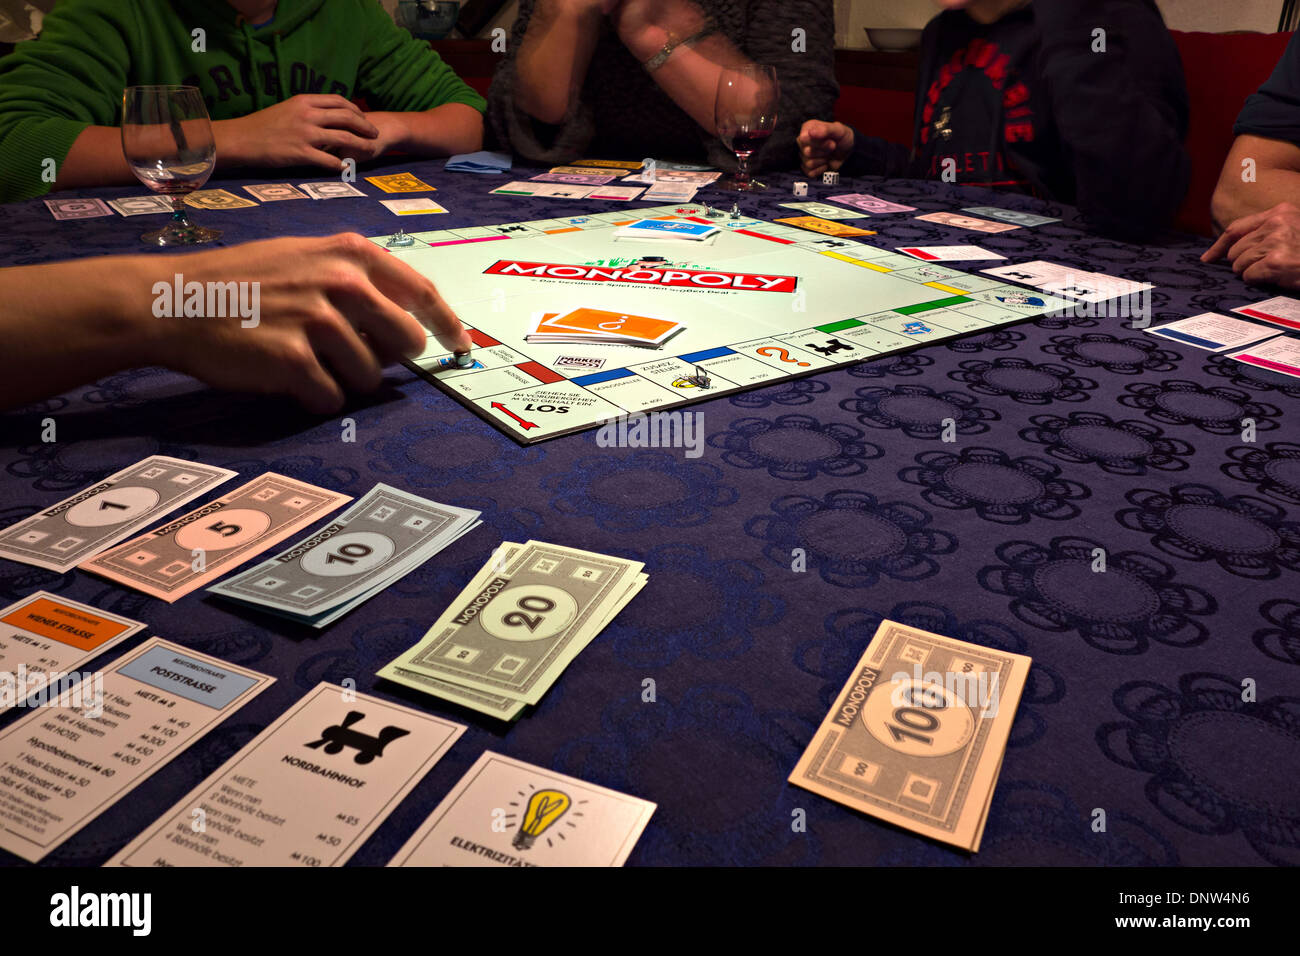 Monopoly game being played, Germany Europe Stock Photo